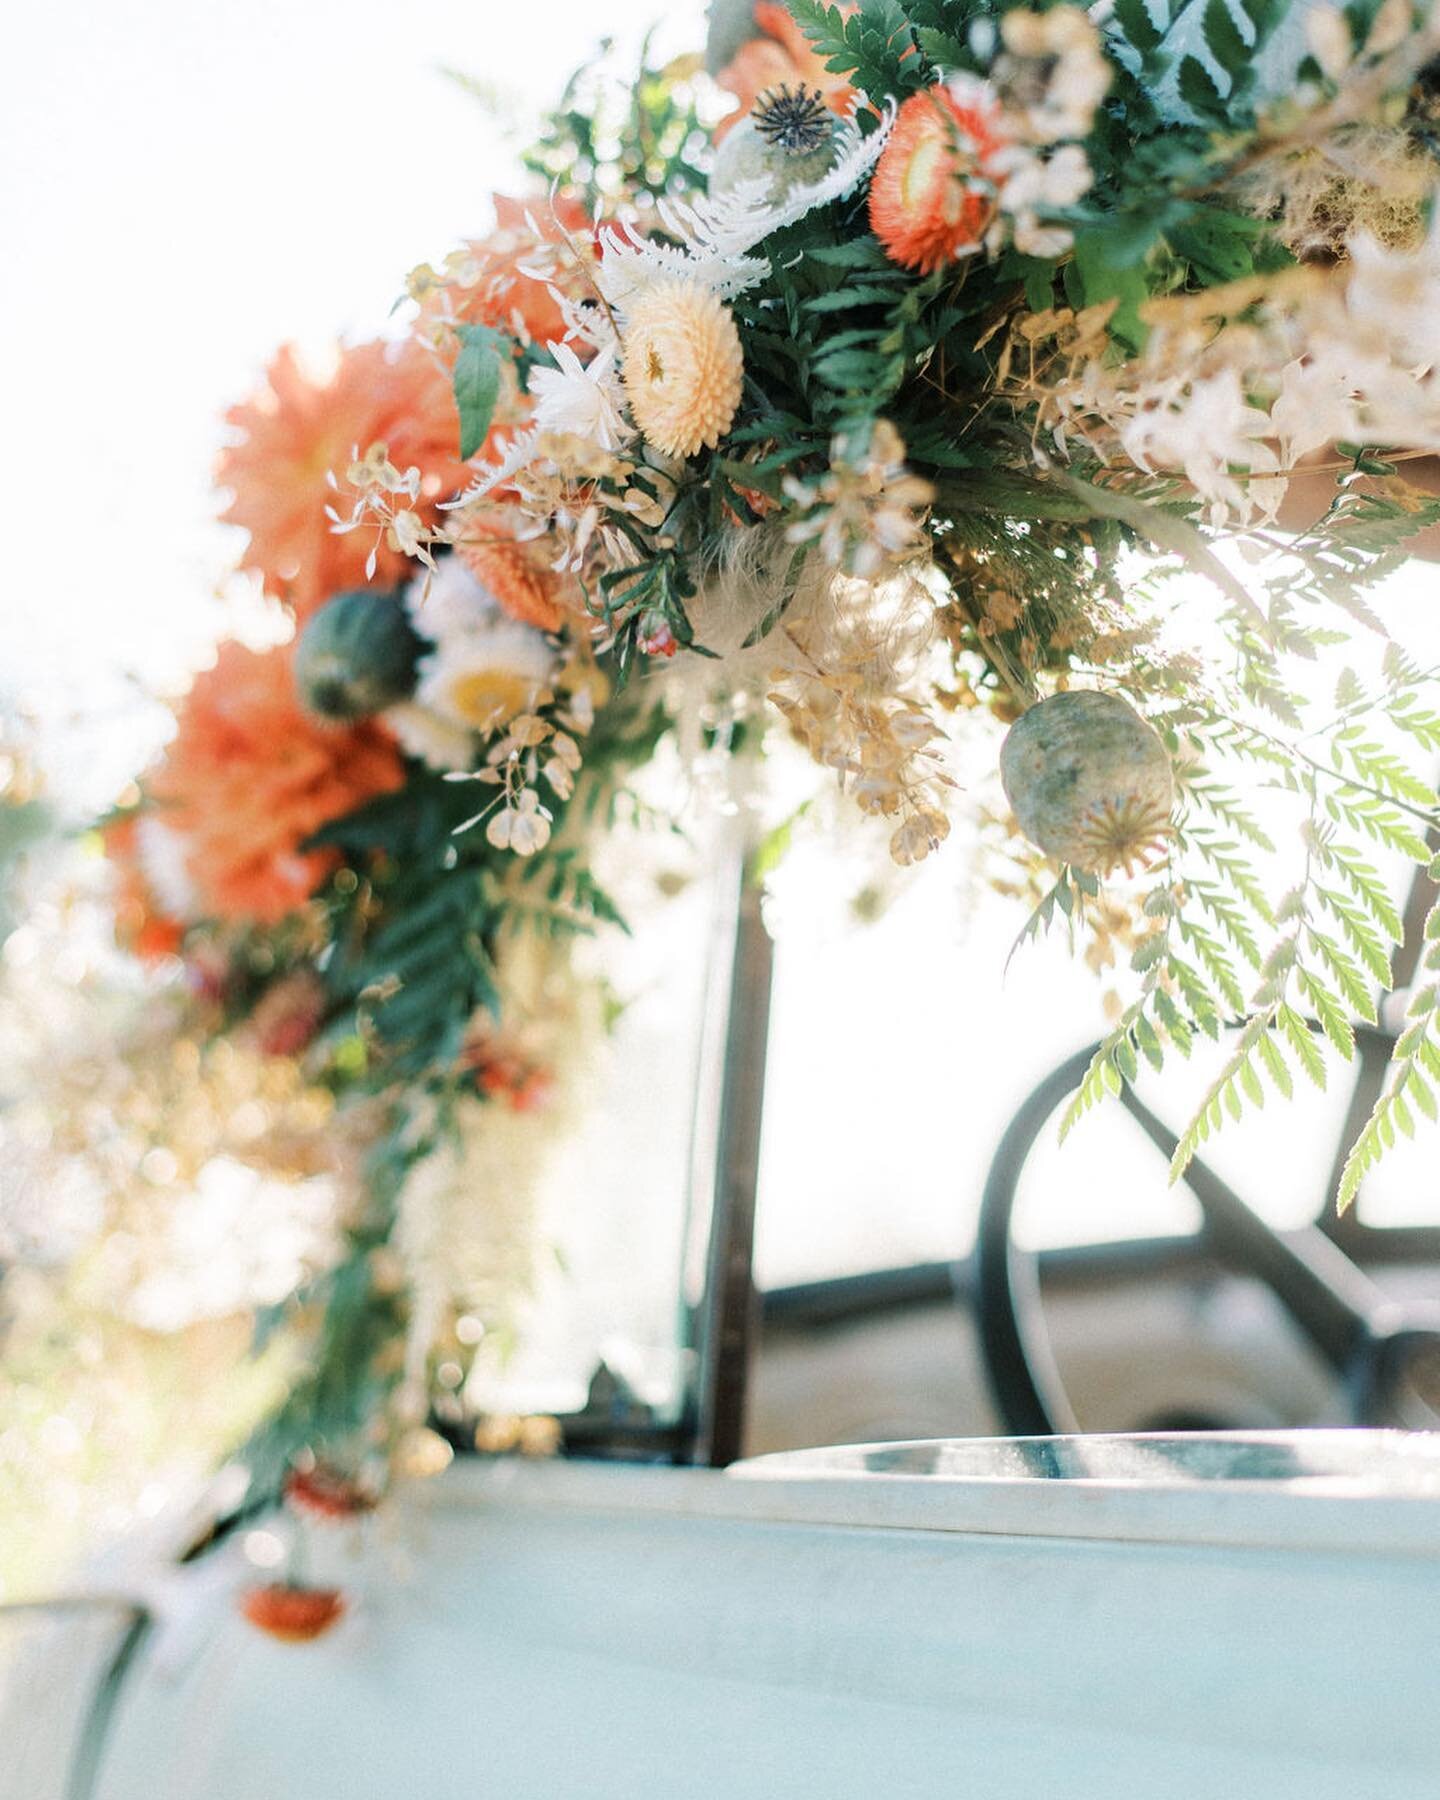 A few gorgeous sneak peaks from the most recent True to Hue: Olive shootout!
WE CAN&rsquo;T GET ENOUGH!
.
The creative director of Bront&euml; Bride puts on a series of workshops and shootouts within Alberta called True to Hue and they are just unbel